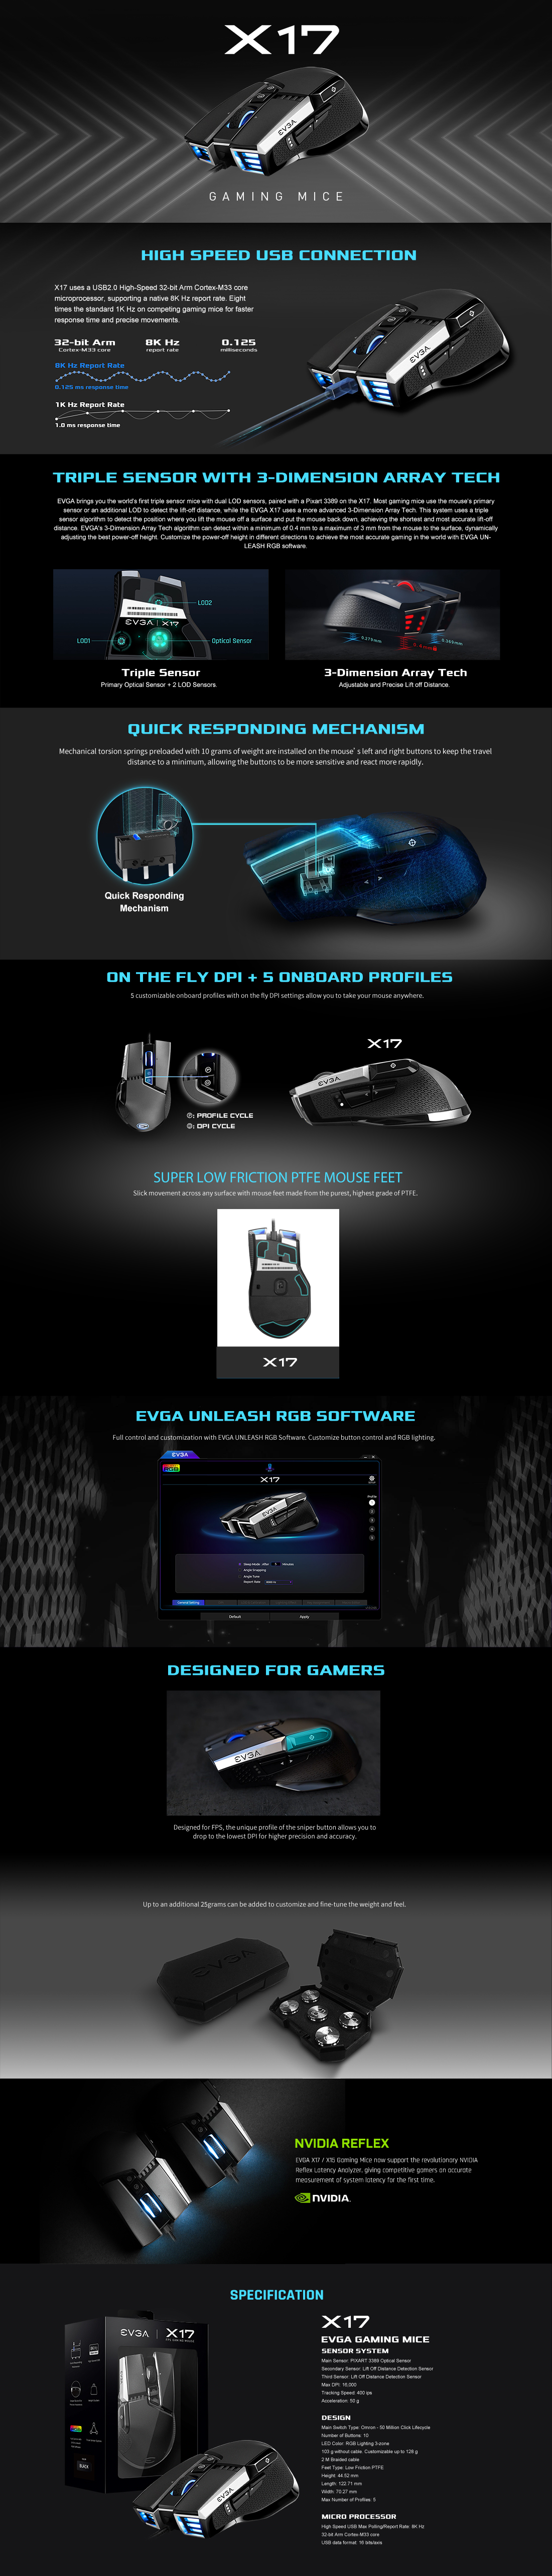 EVGA - Products - EVGA X17 Gaming Mouse, 8k, Wired, Black